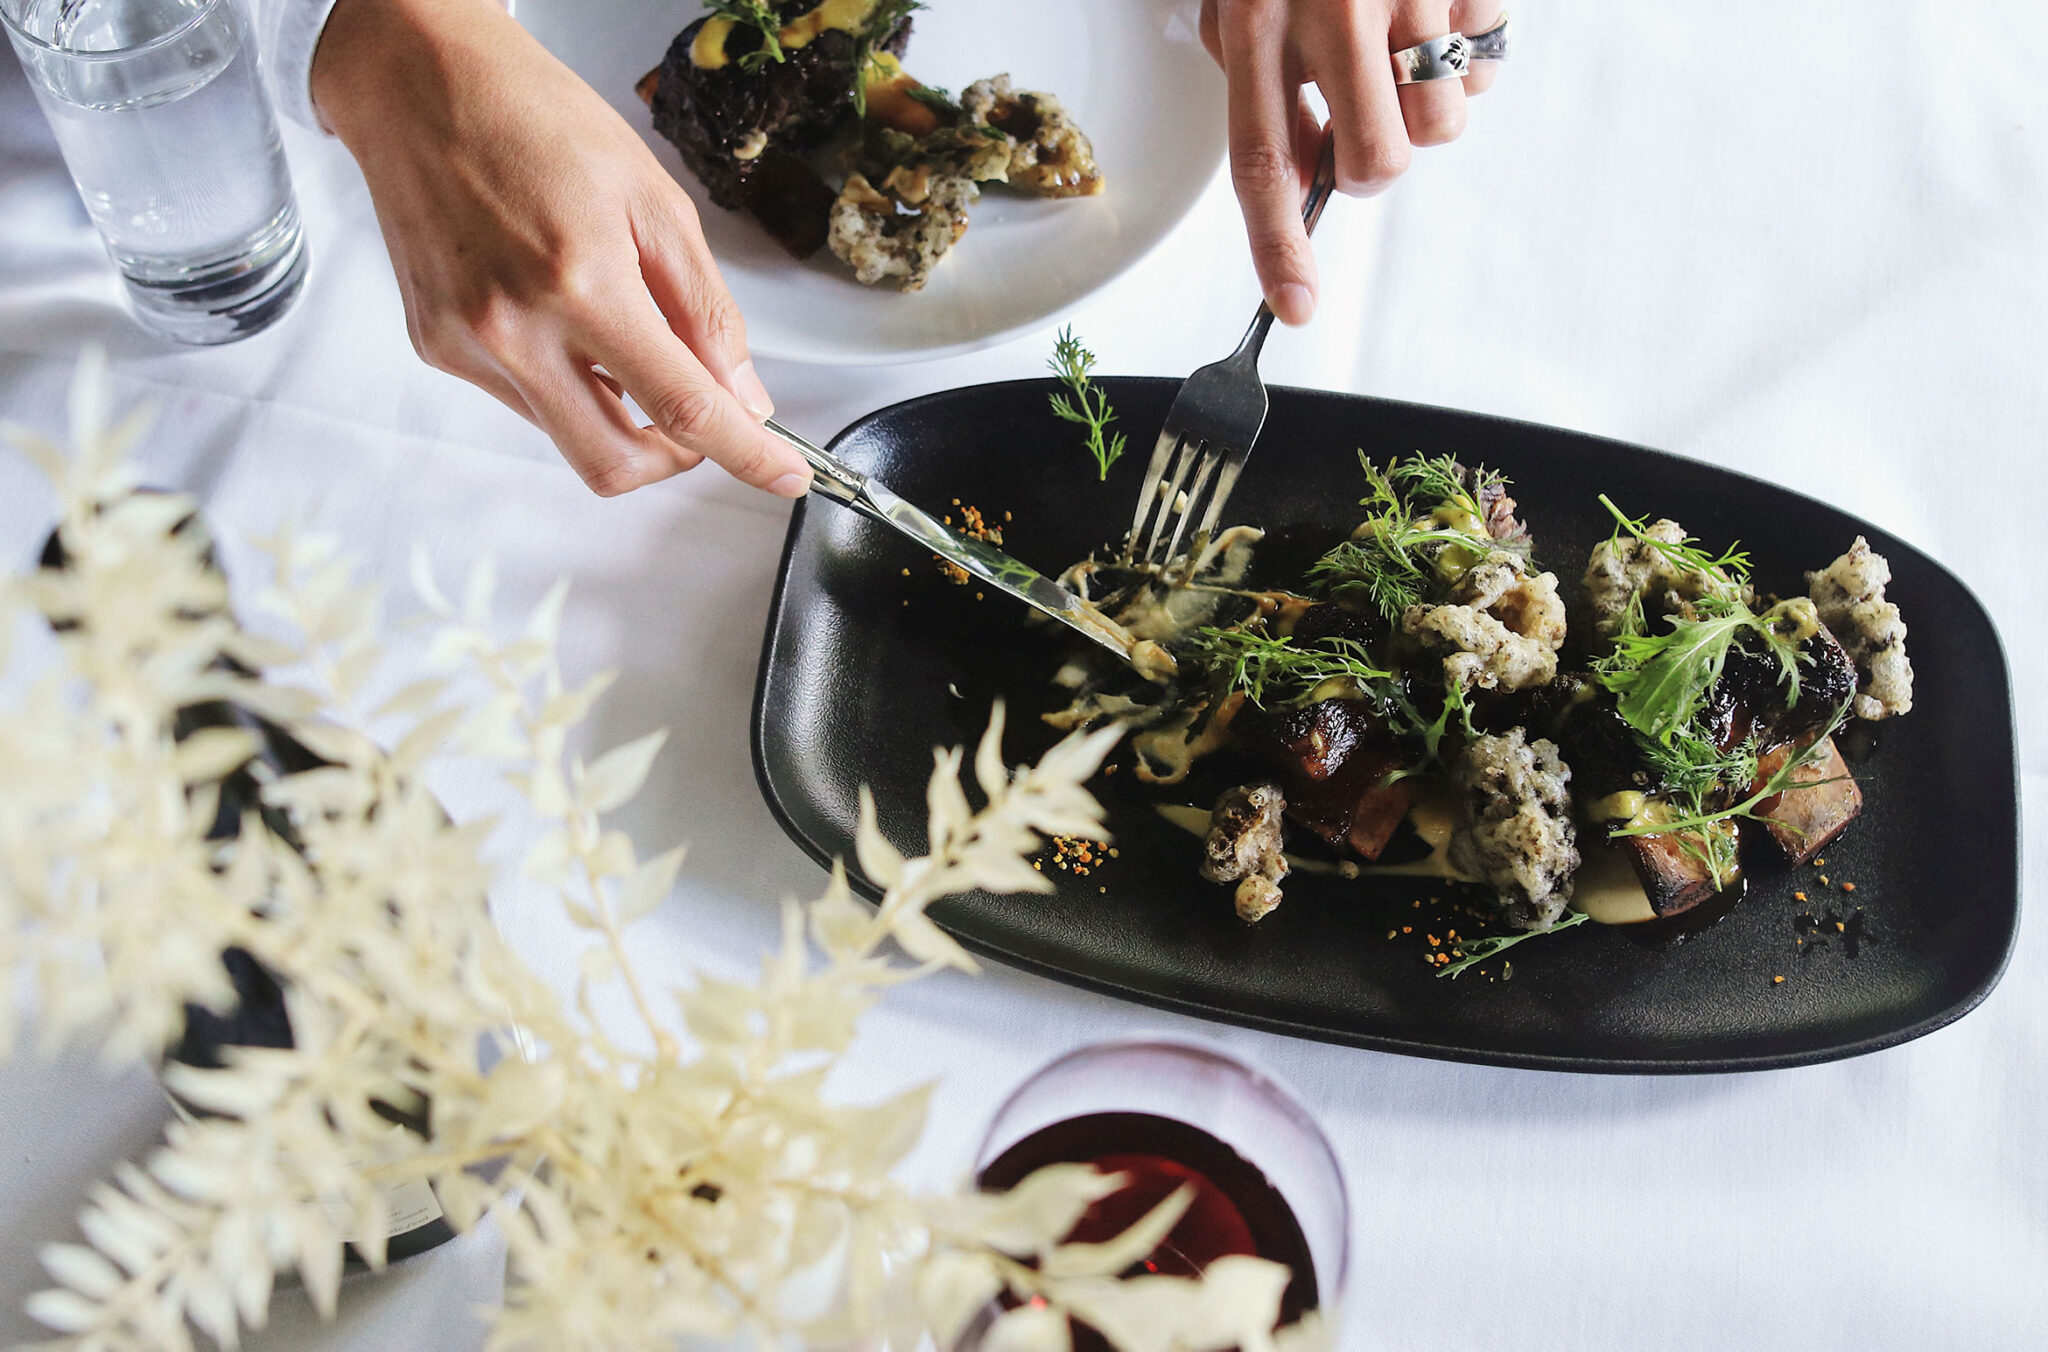 A diner takes foraged food from a share plate at Alta Bistro.